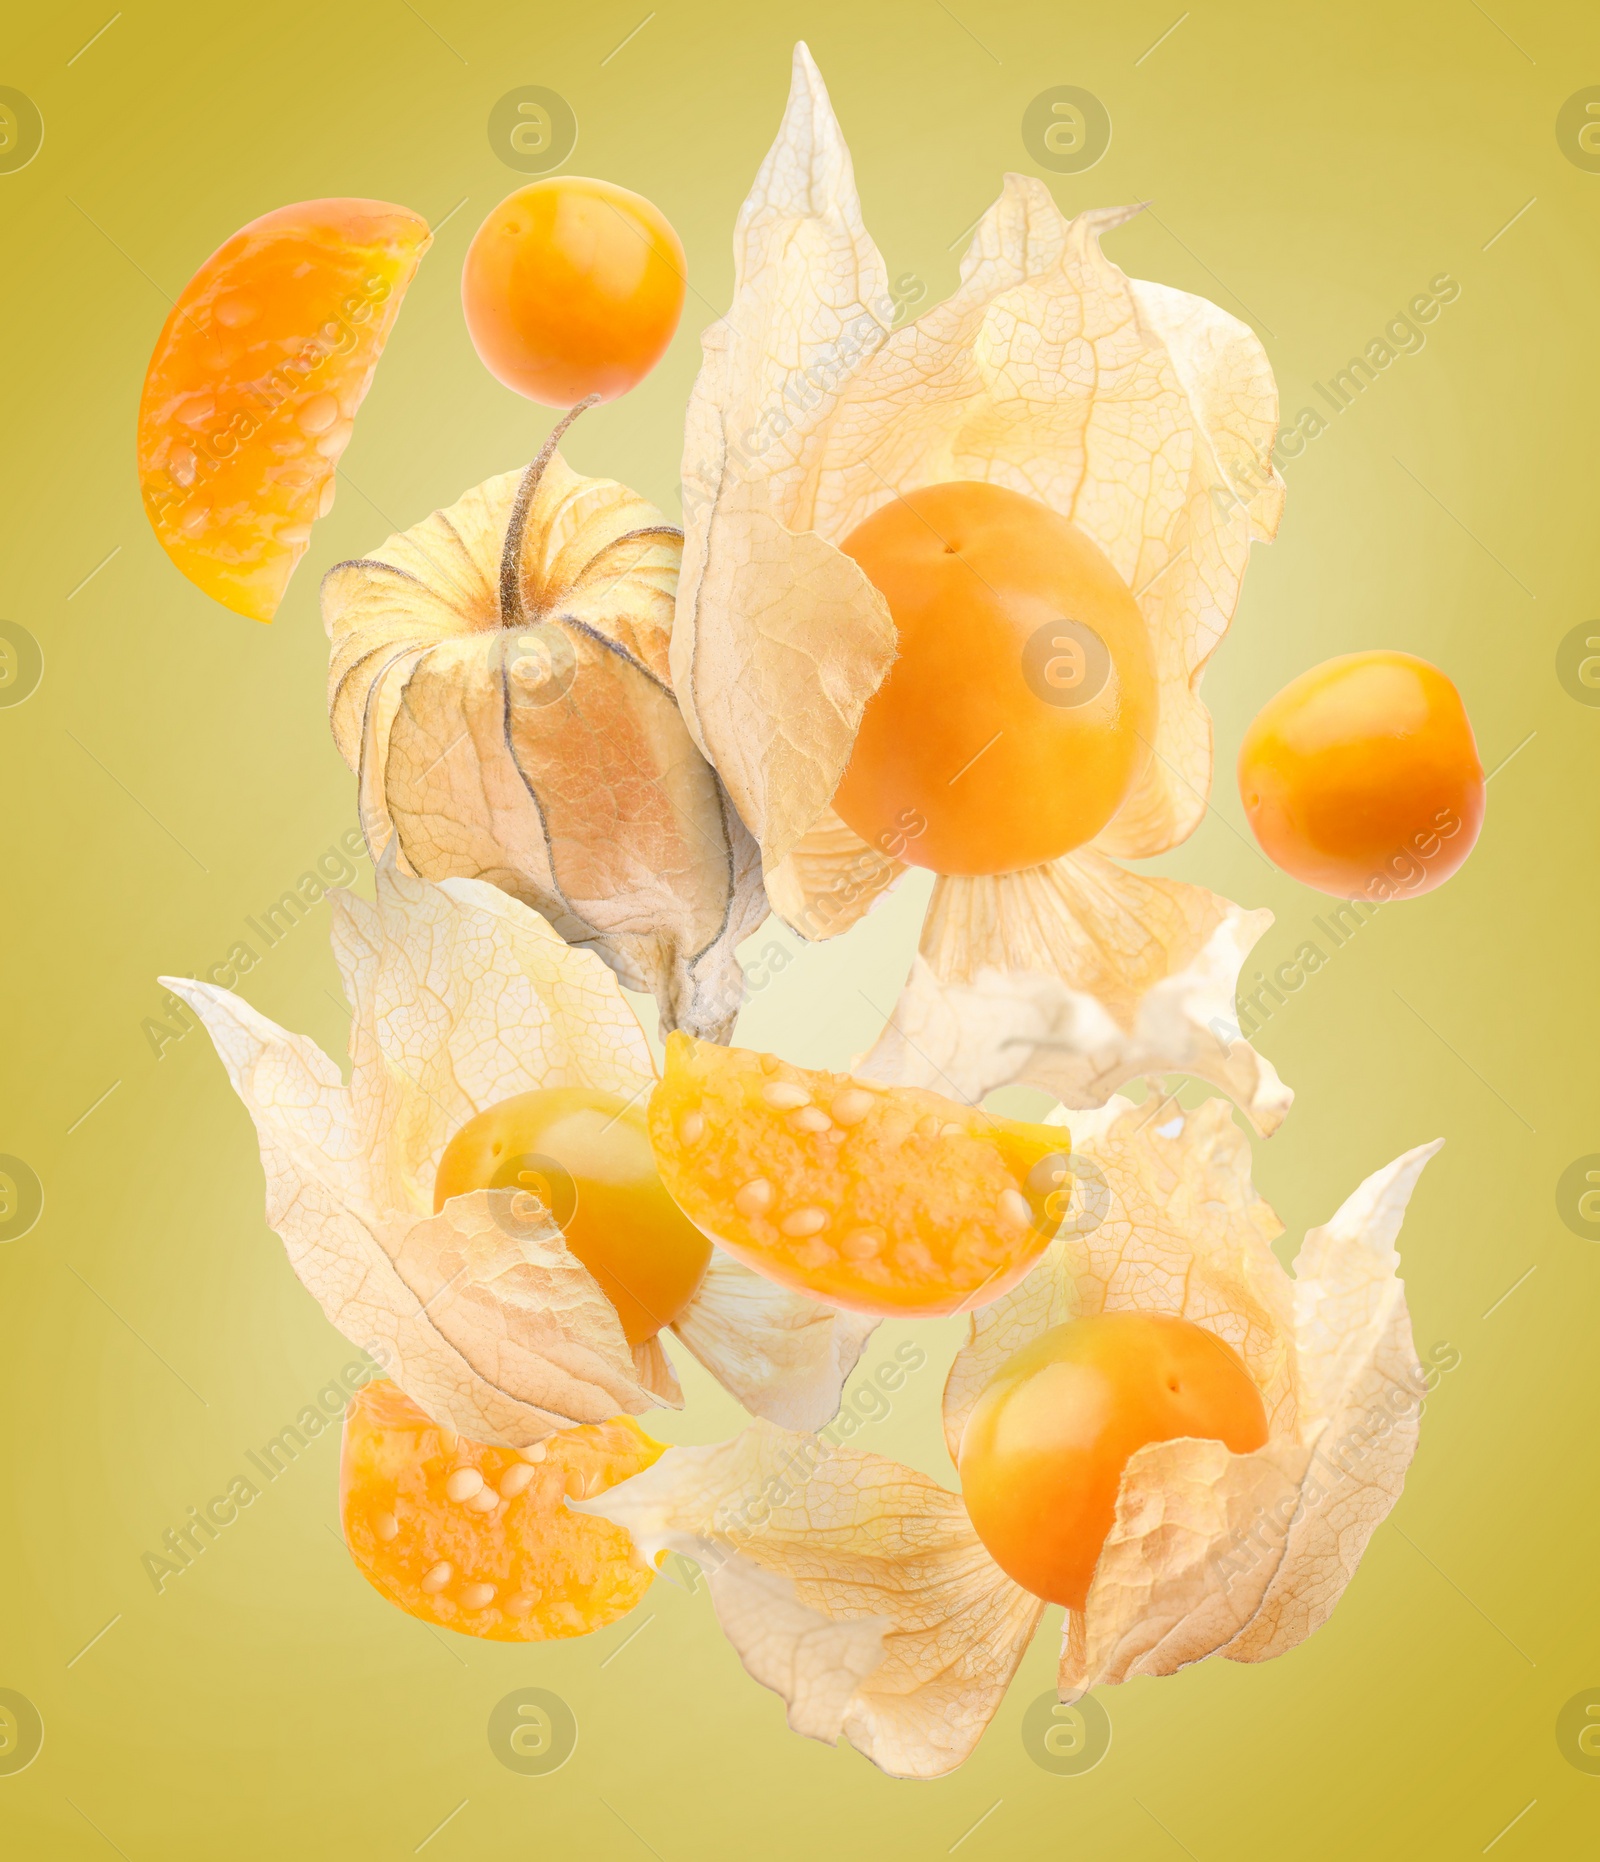 Image of Ripe orange physalis fruits with calyx falling on color background